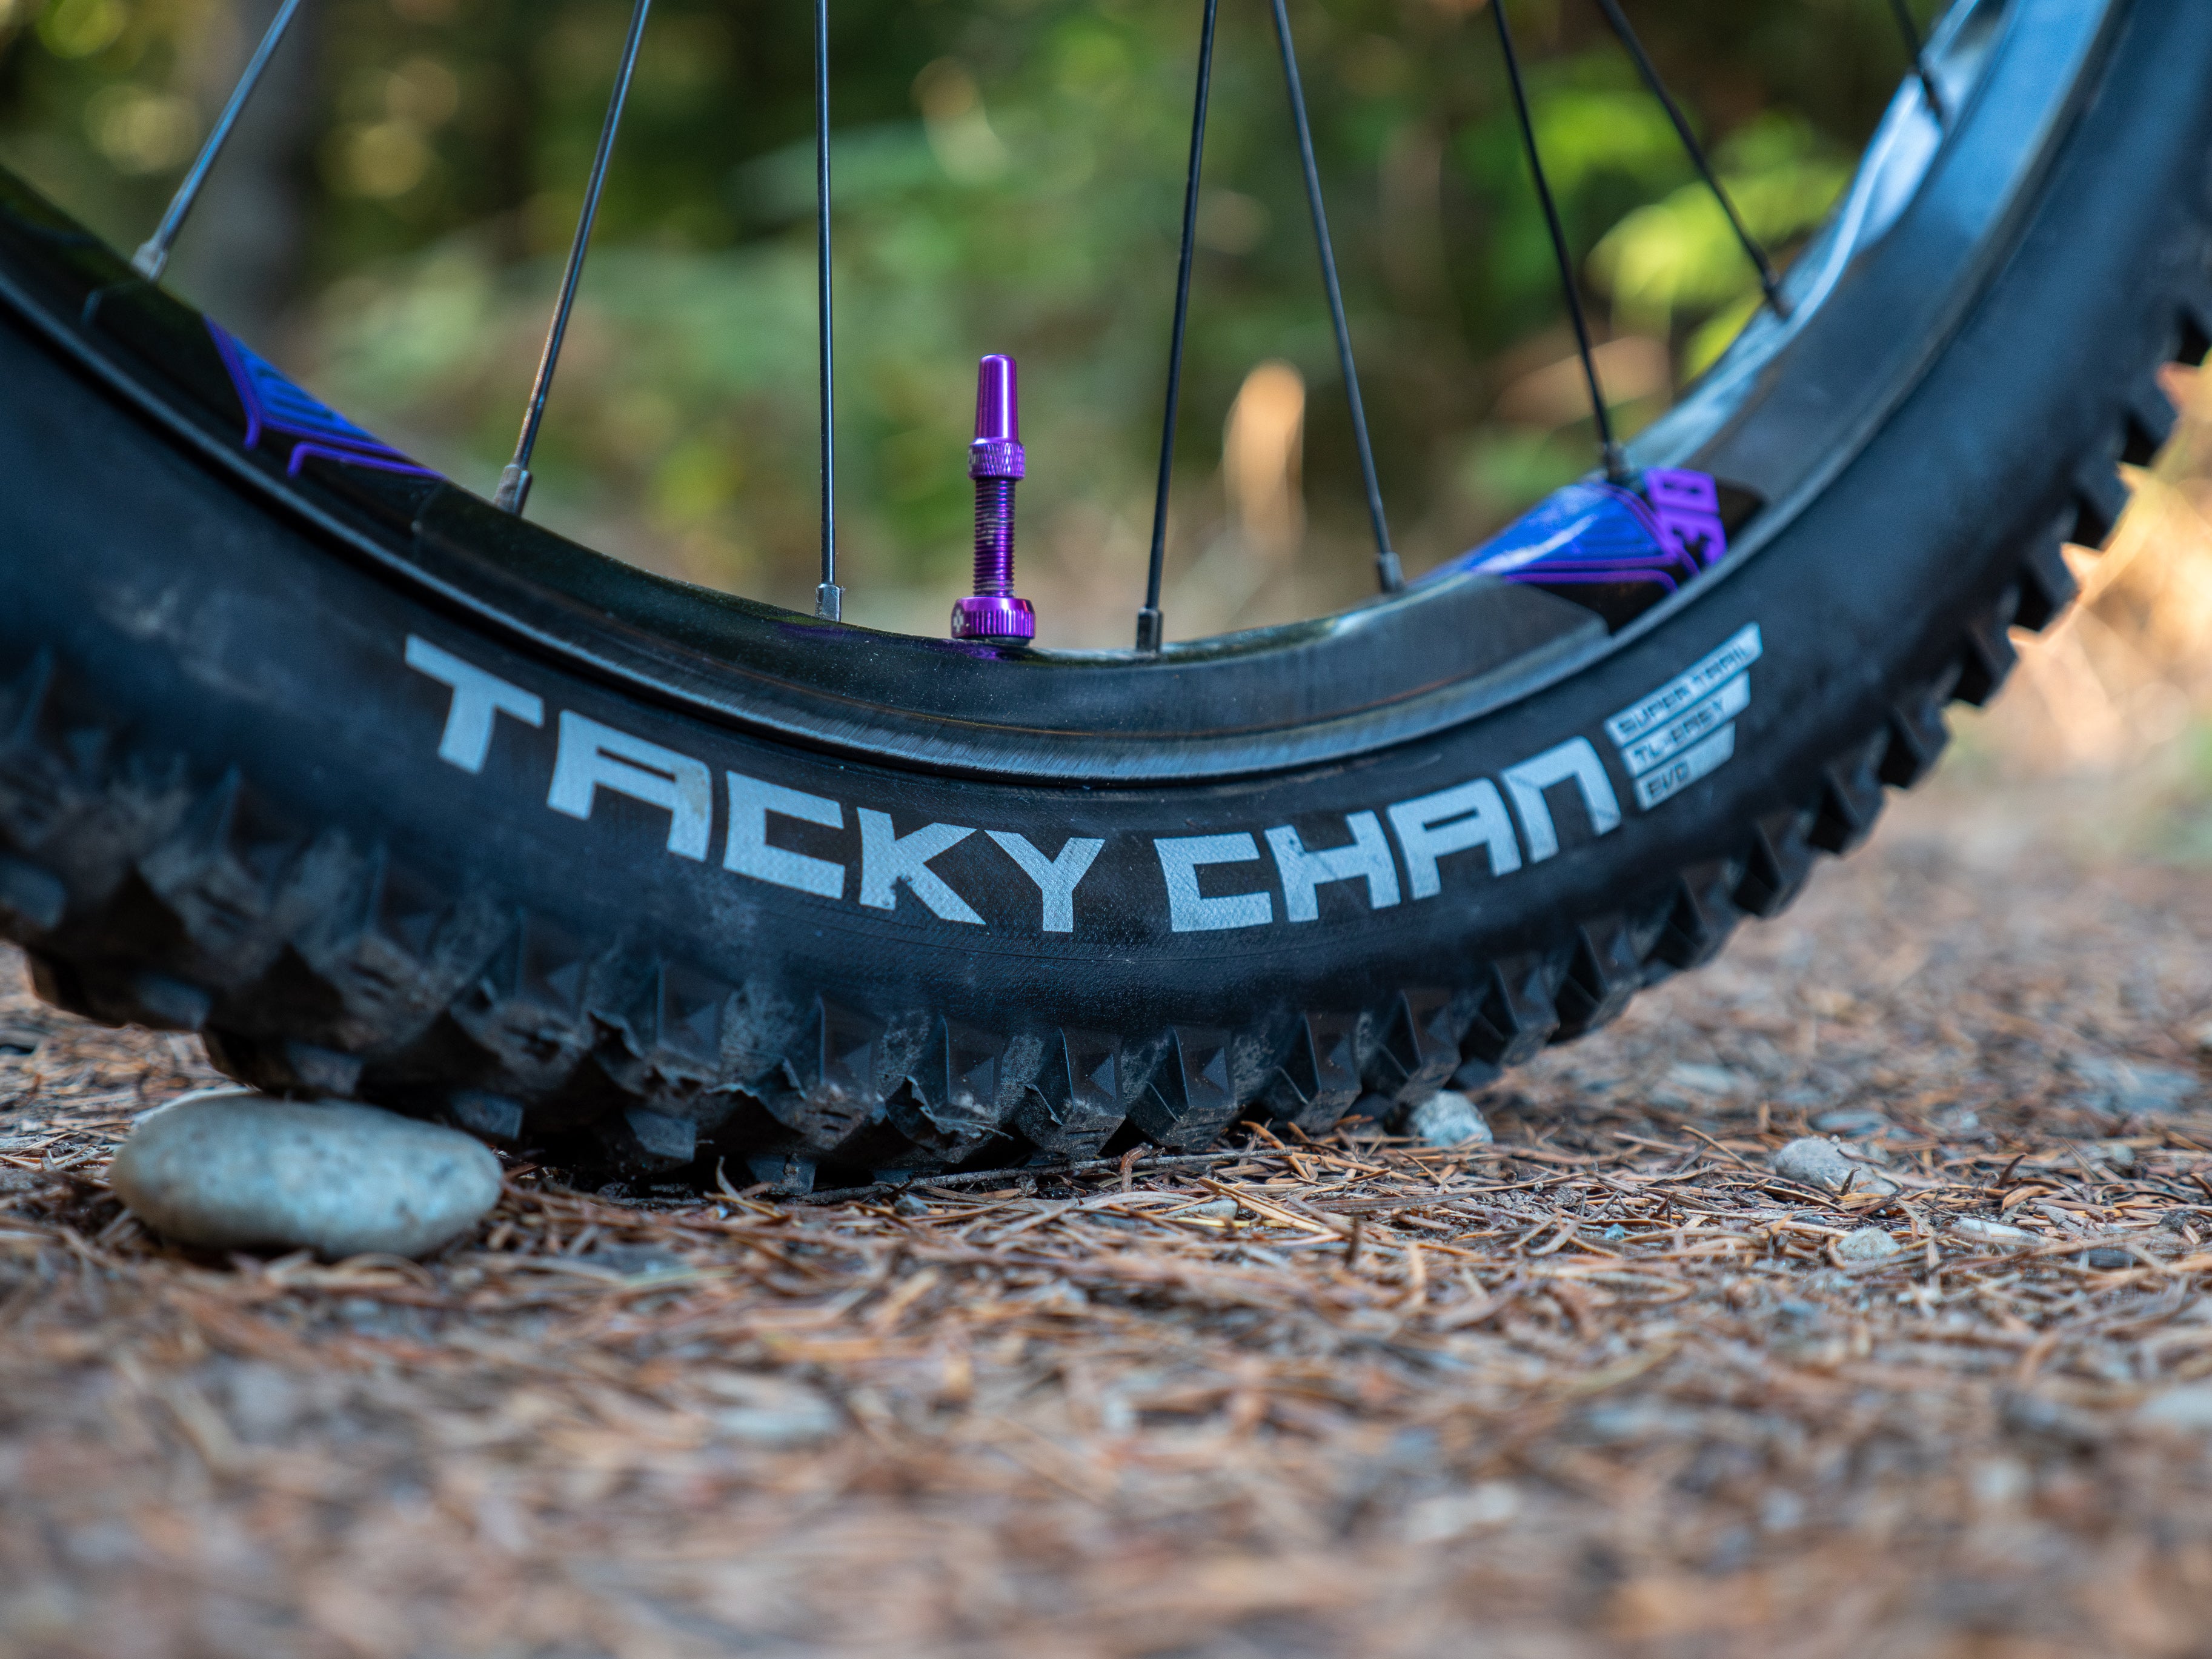 Is the Tacky Chan a good tire?